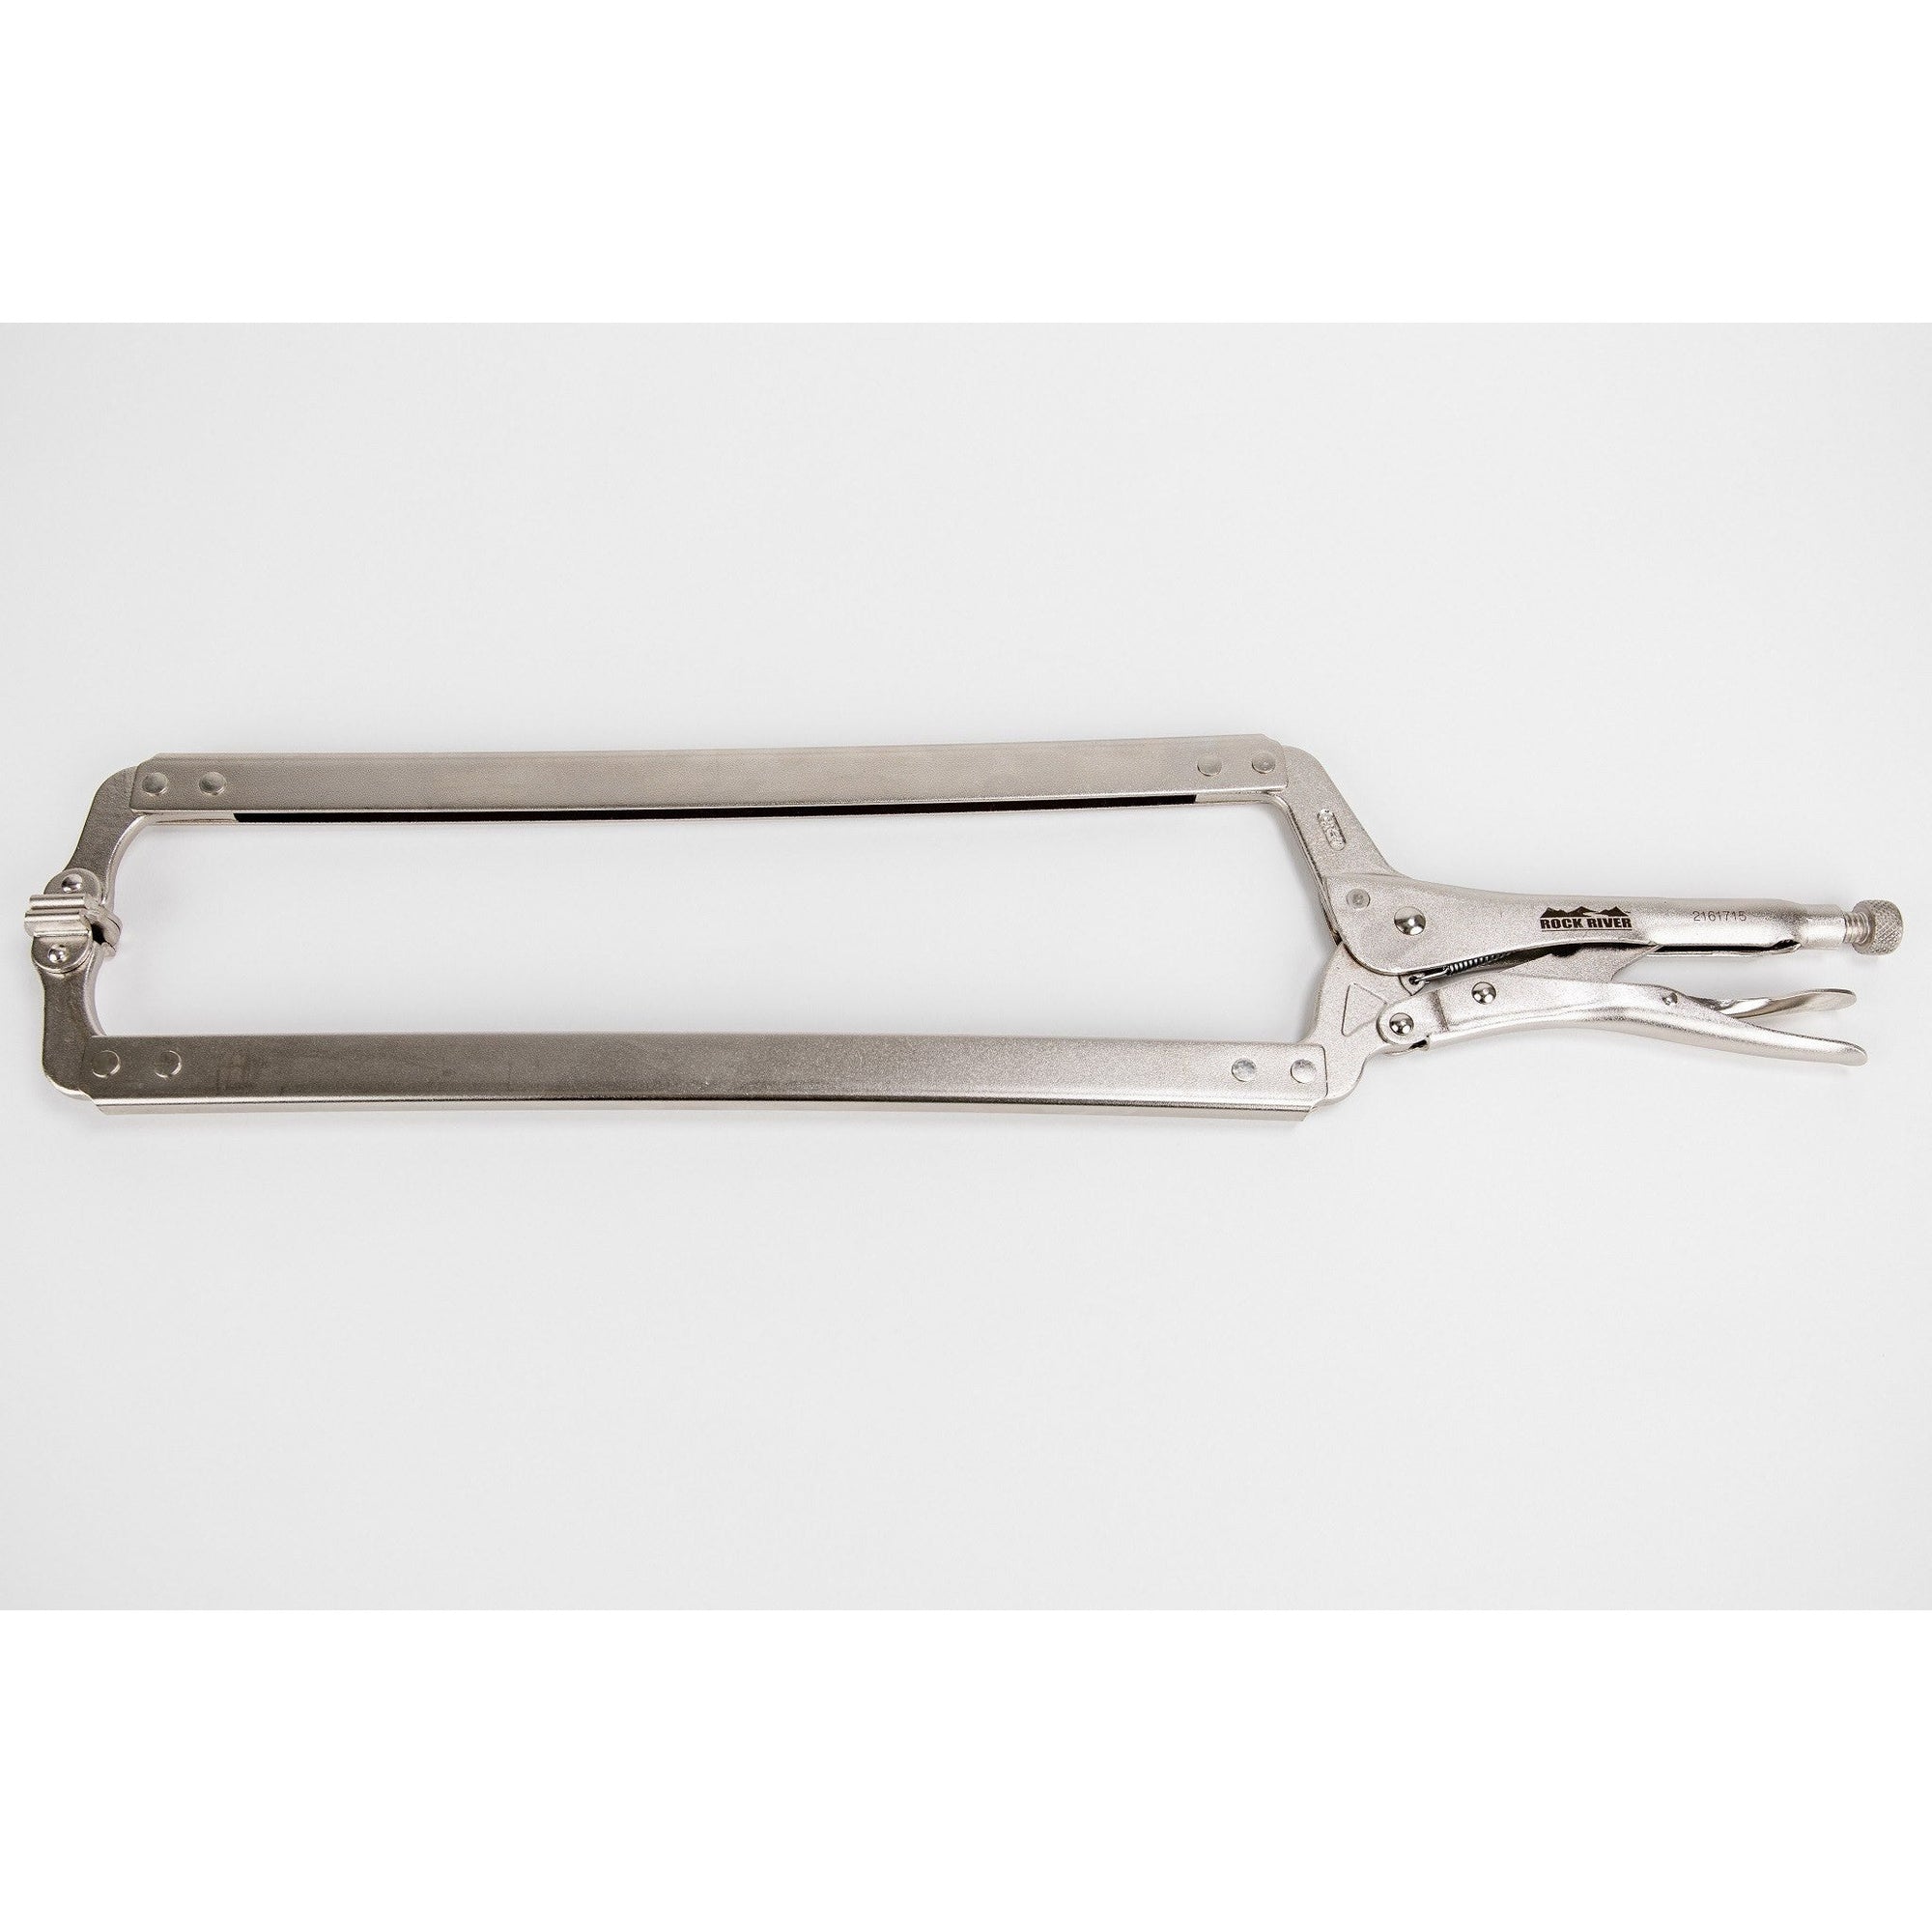 Clamps - 24" Nickel Plated C-Clamps Locking Pliers With Pads - Rock River